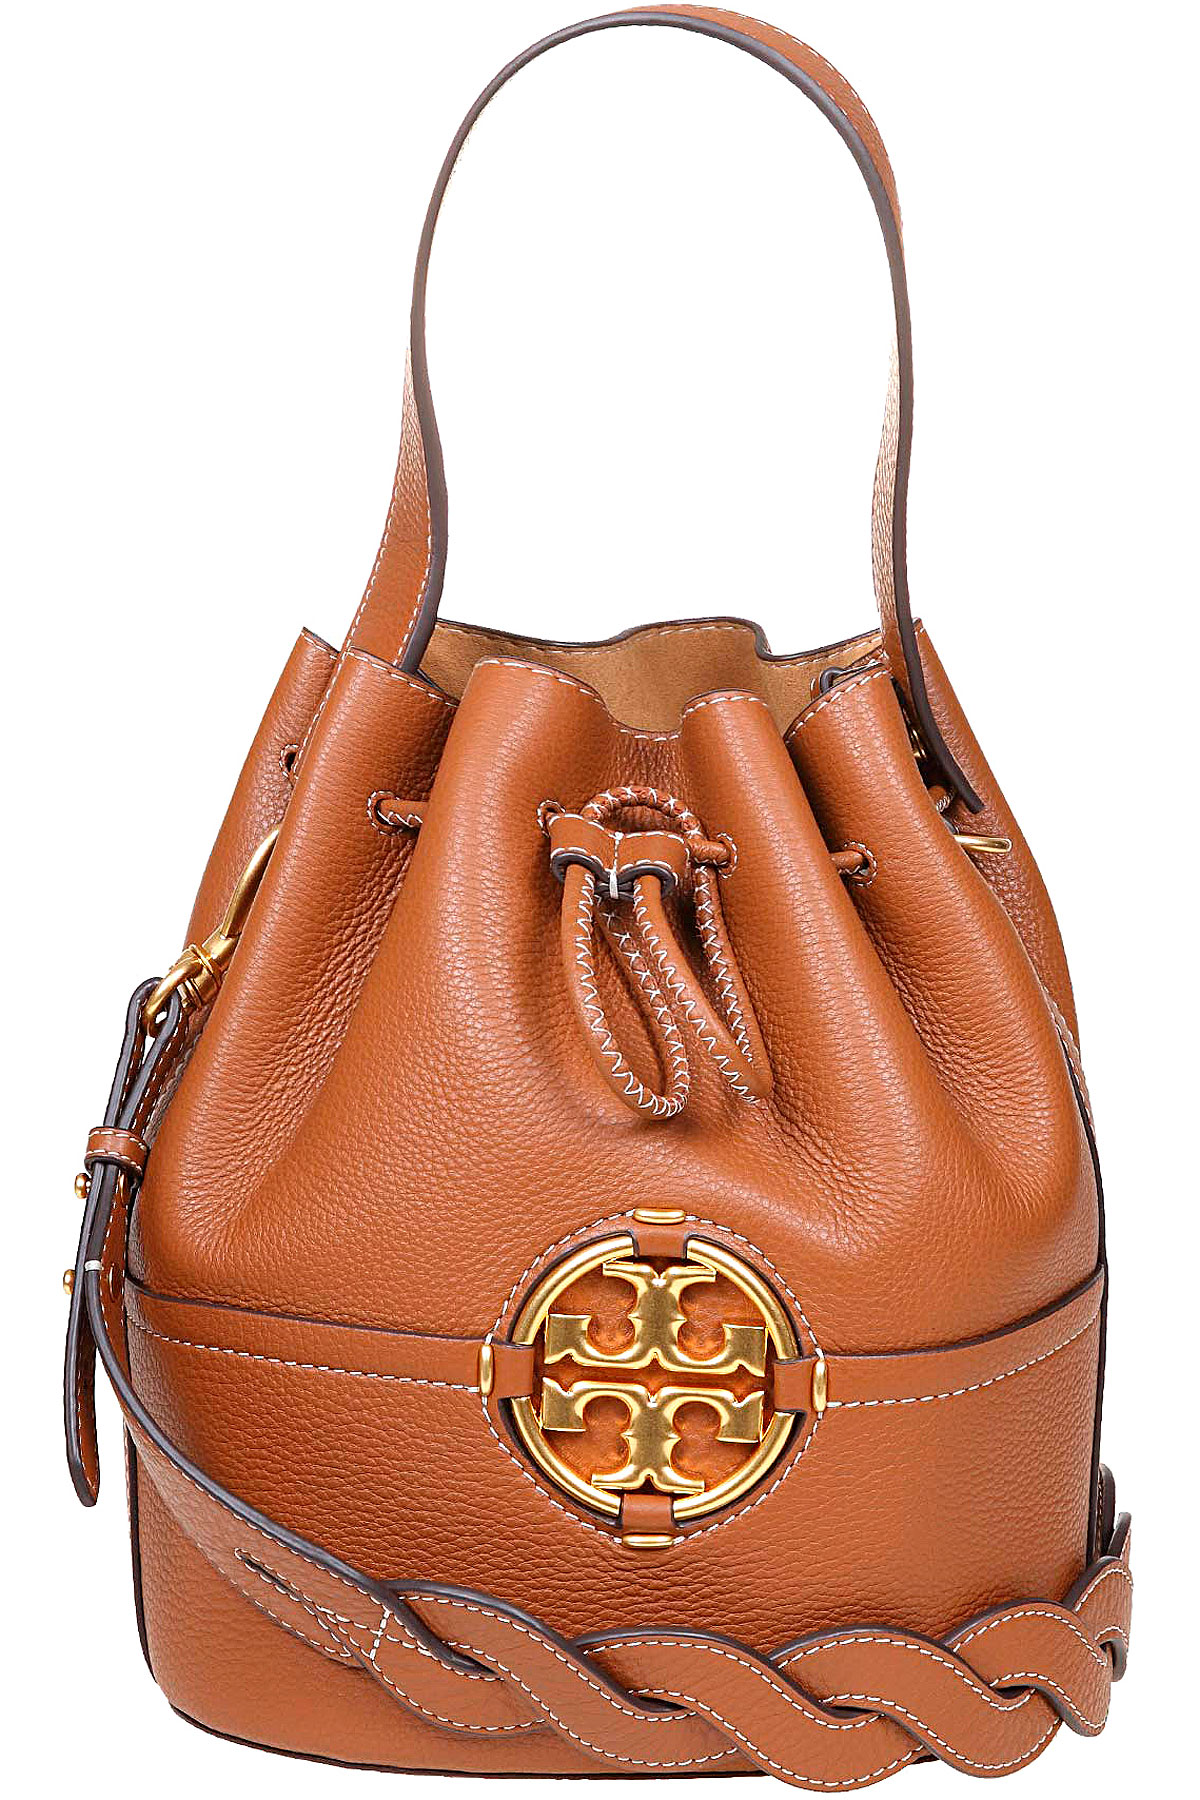 tory burch for sale